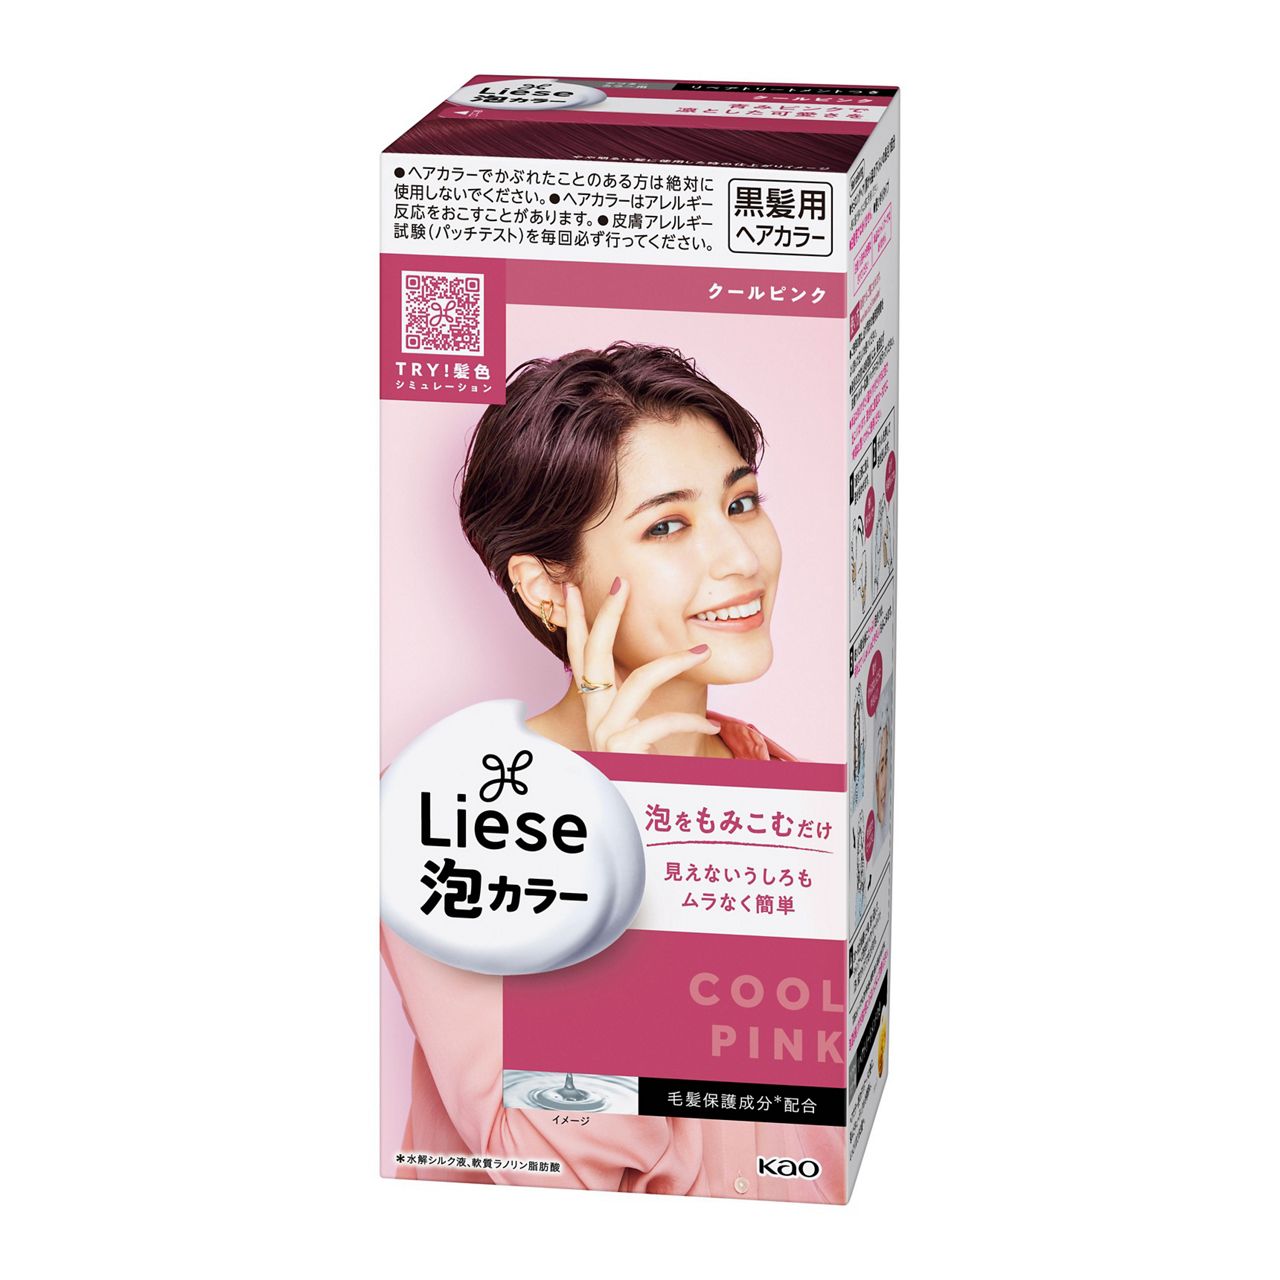 Liese Kao Bubble Hair Color Prettia - Cool Pink - Harajuku Culture Japan - Japanease Products Store Beauty and Stationery